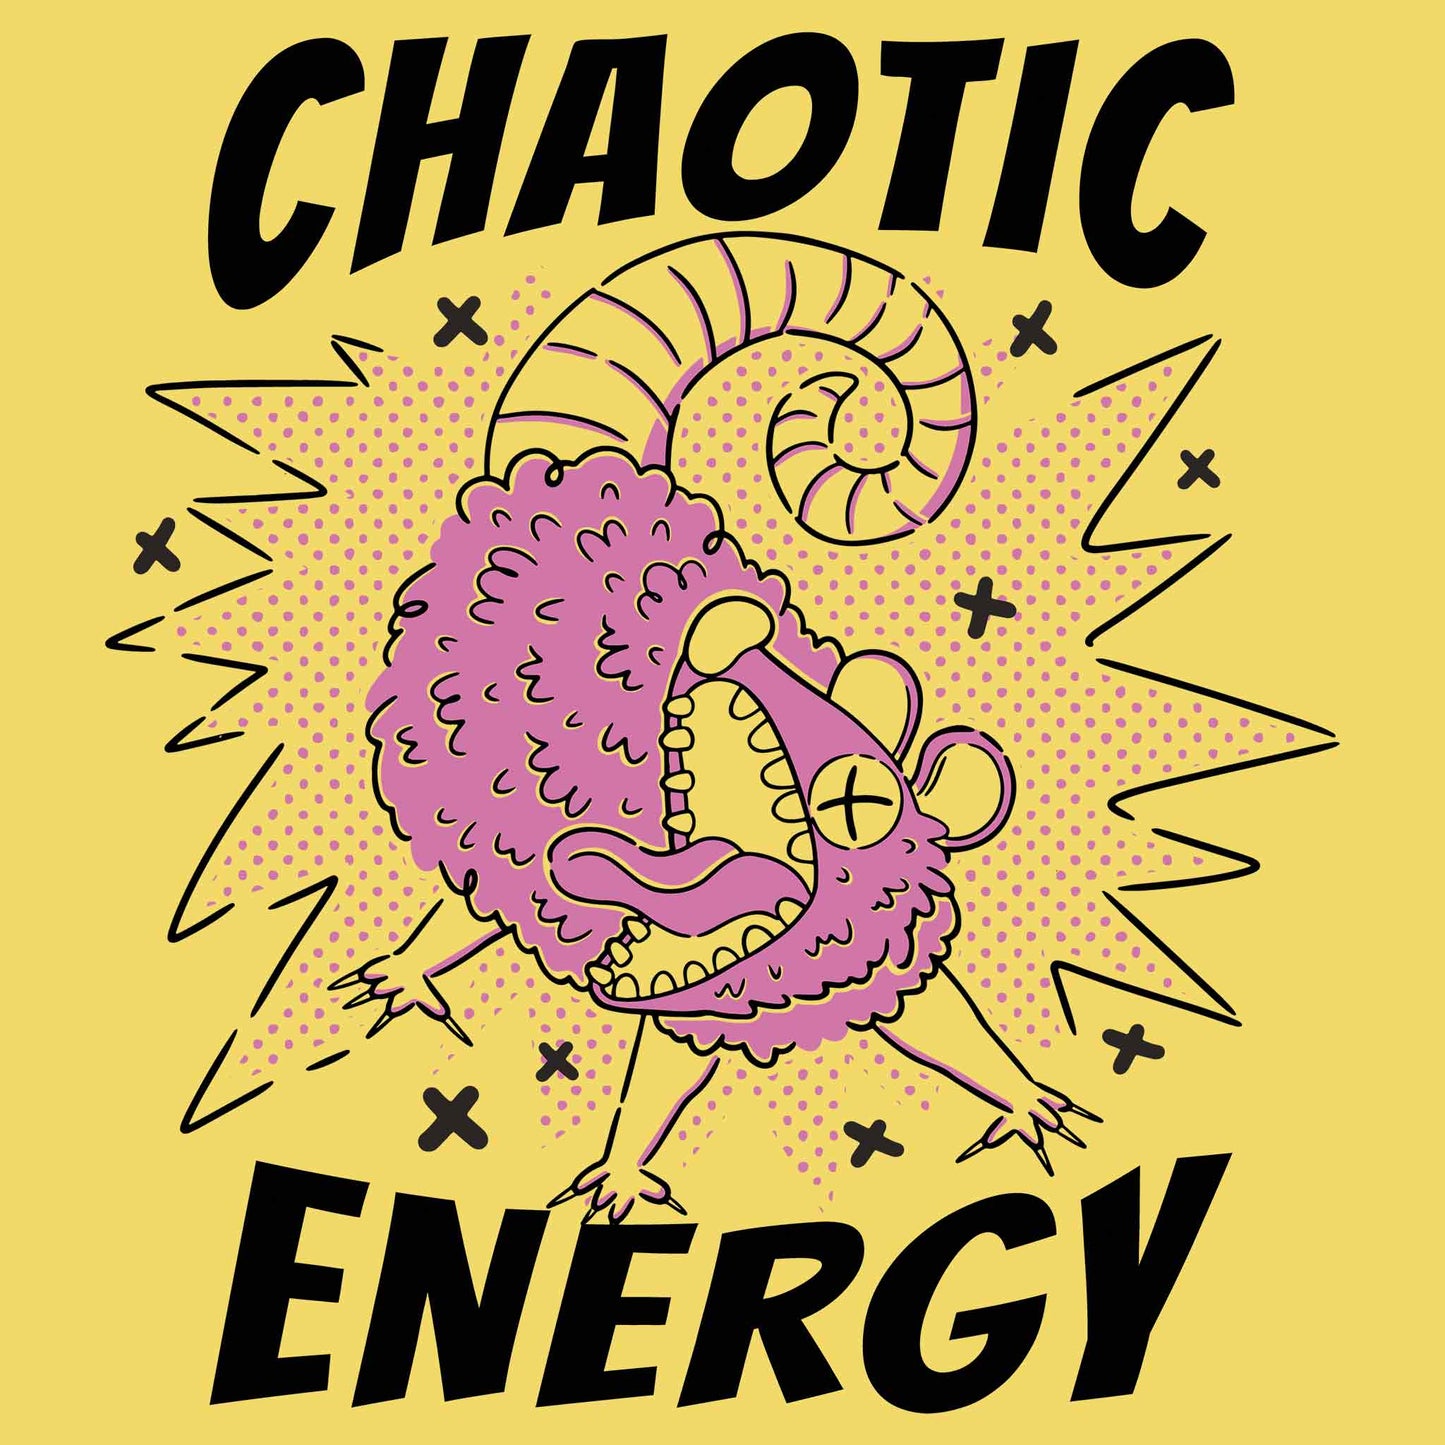 Chaotic Energy T-Shirt